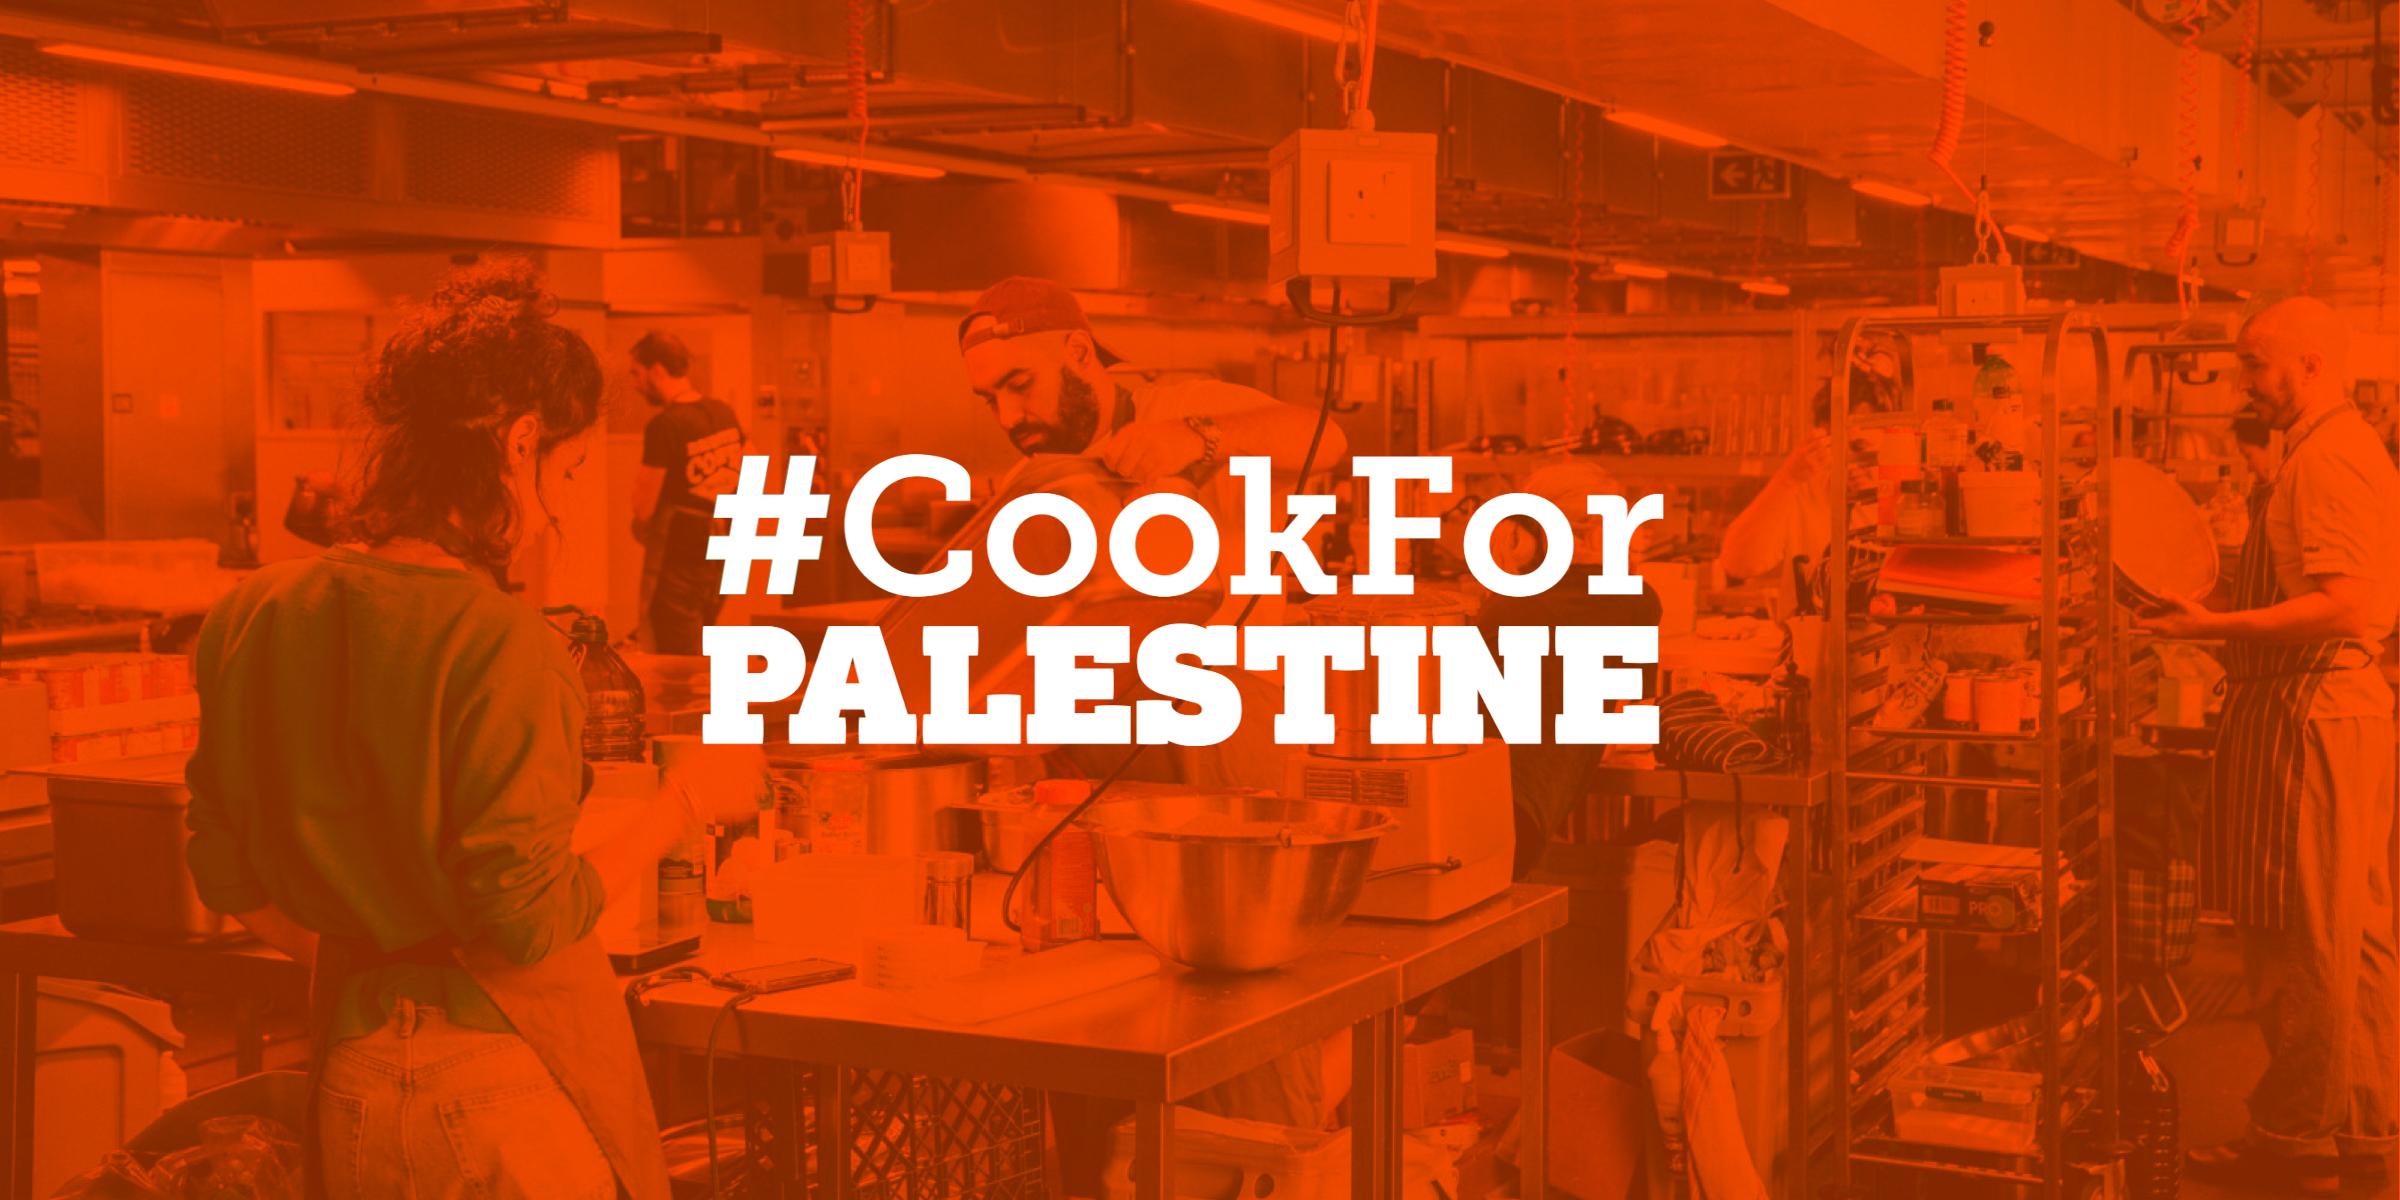 Cook for Palestine